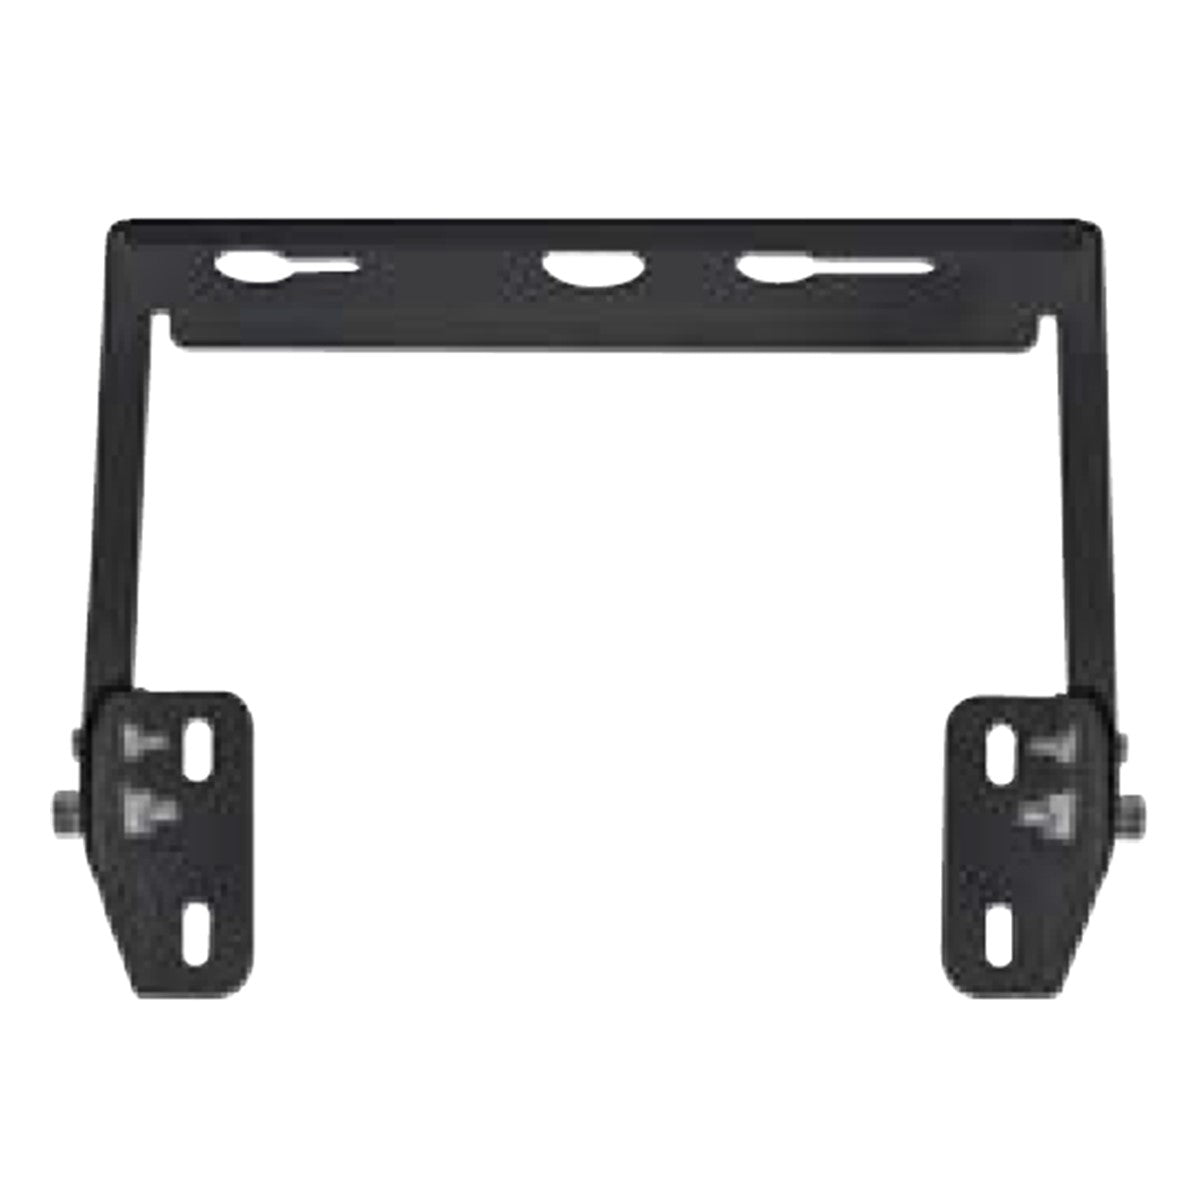 Sylvania UFO High Bay 3A Black Surface/Pendant Mount Bracket, For 200-240W Products